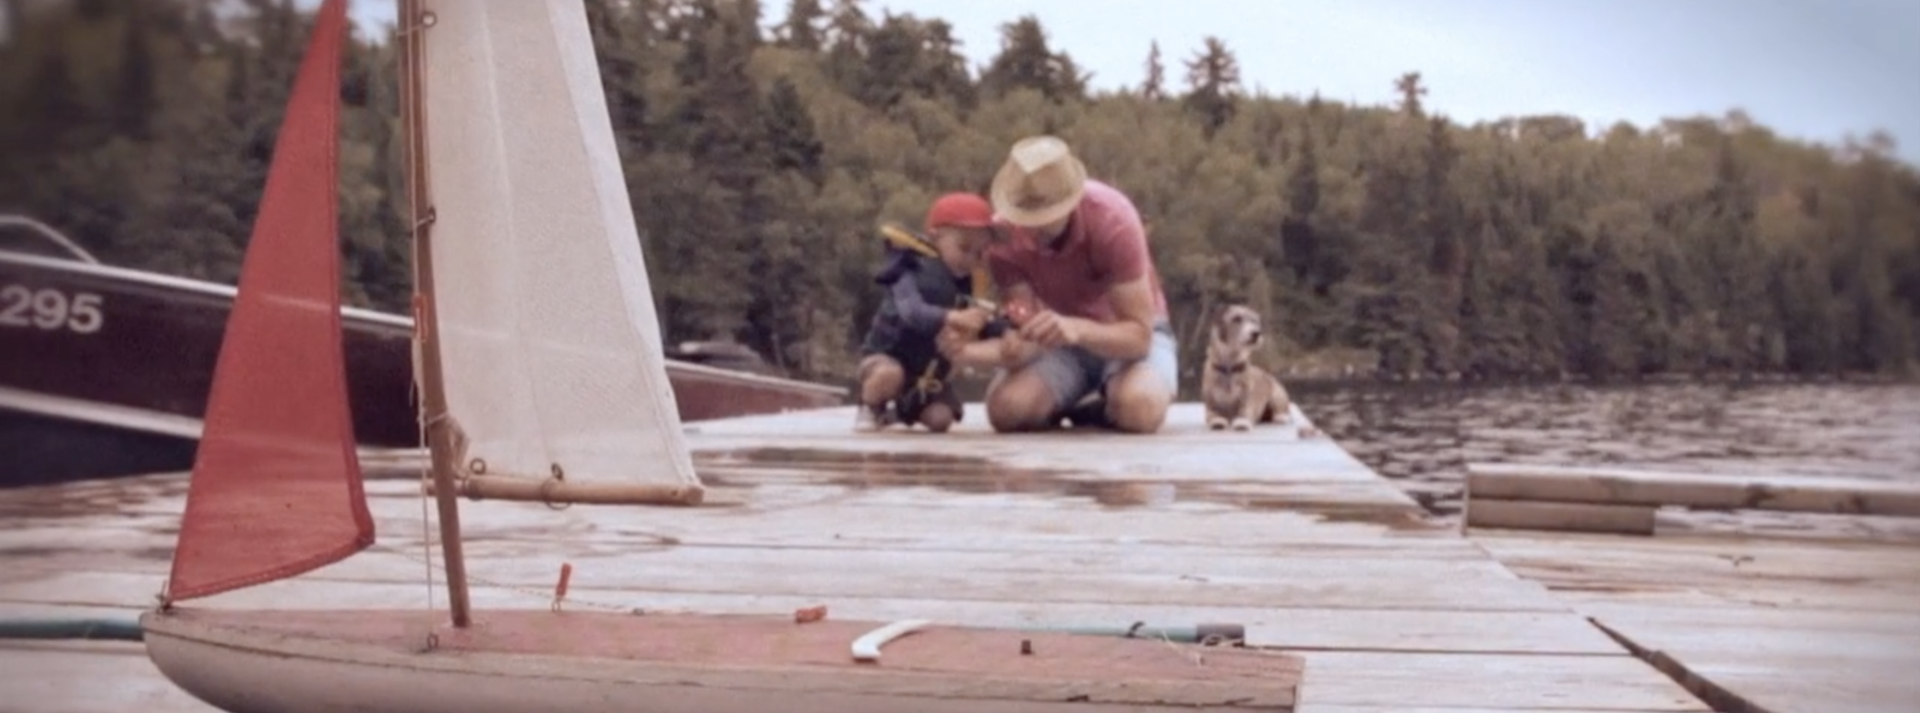 A Man and his child and dog are on a river/lake dock, attempting to fix a tool together. A toy boat is in focus at the front.